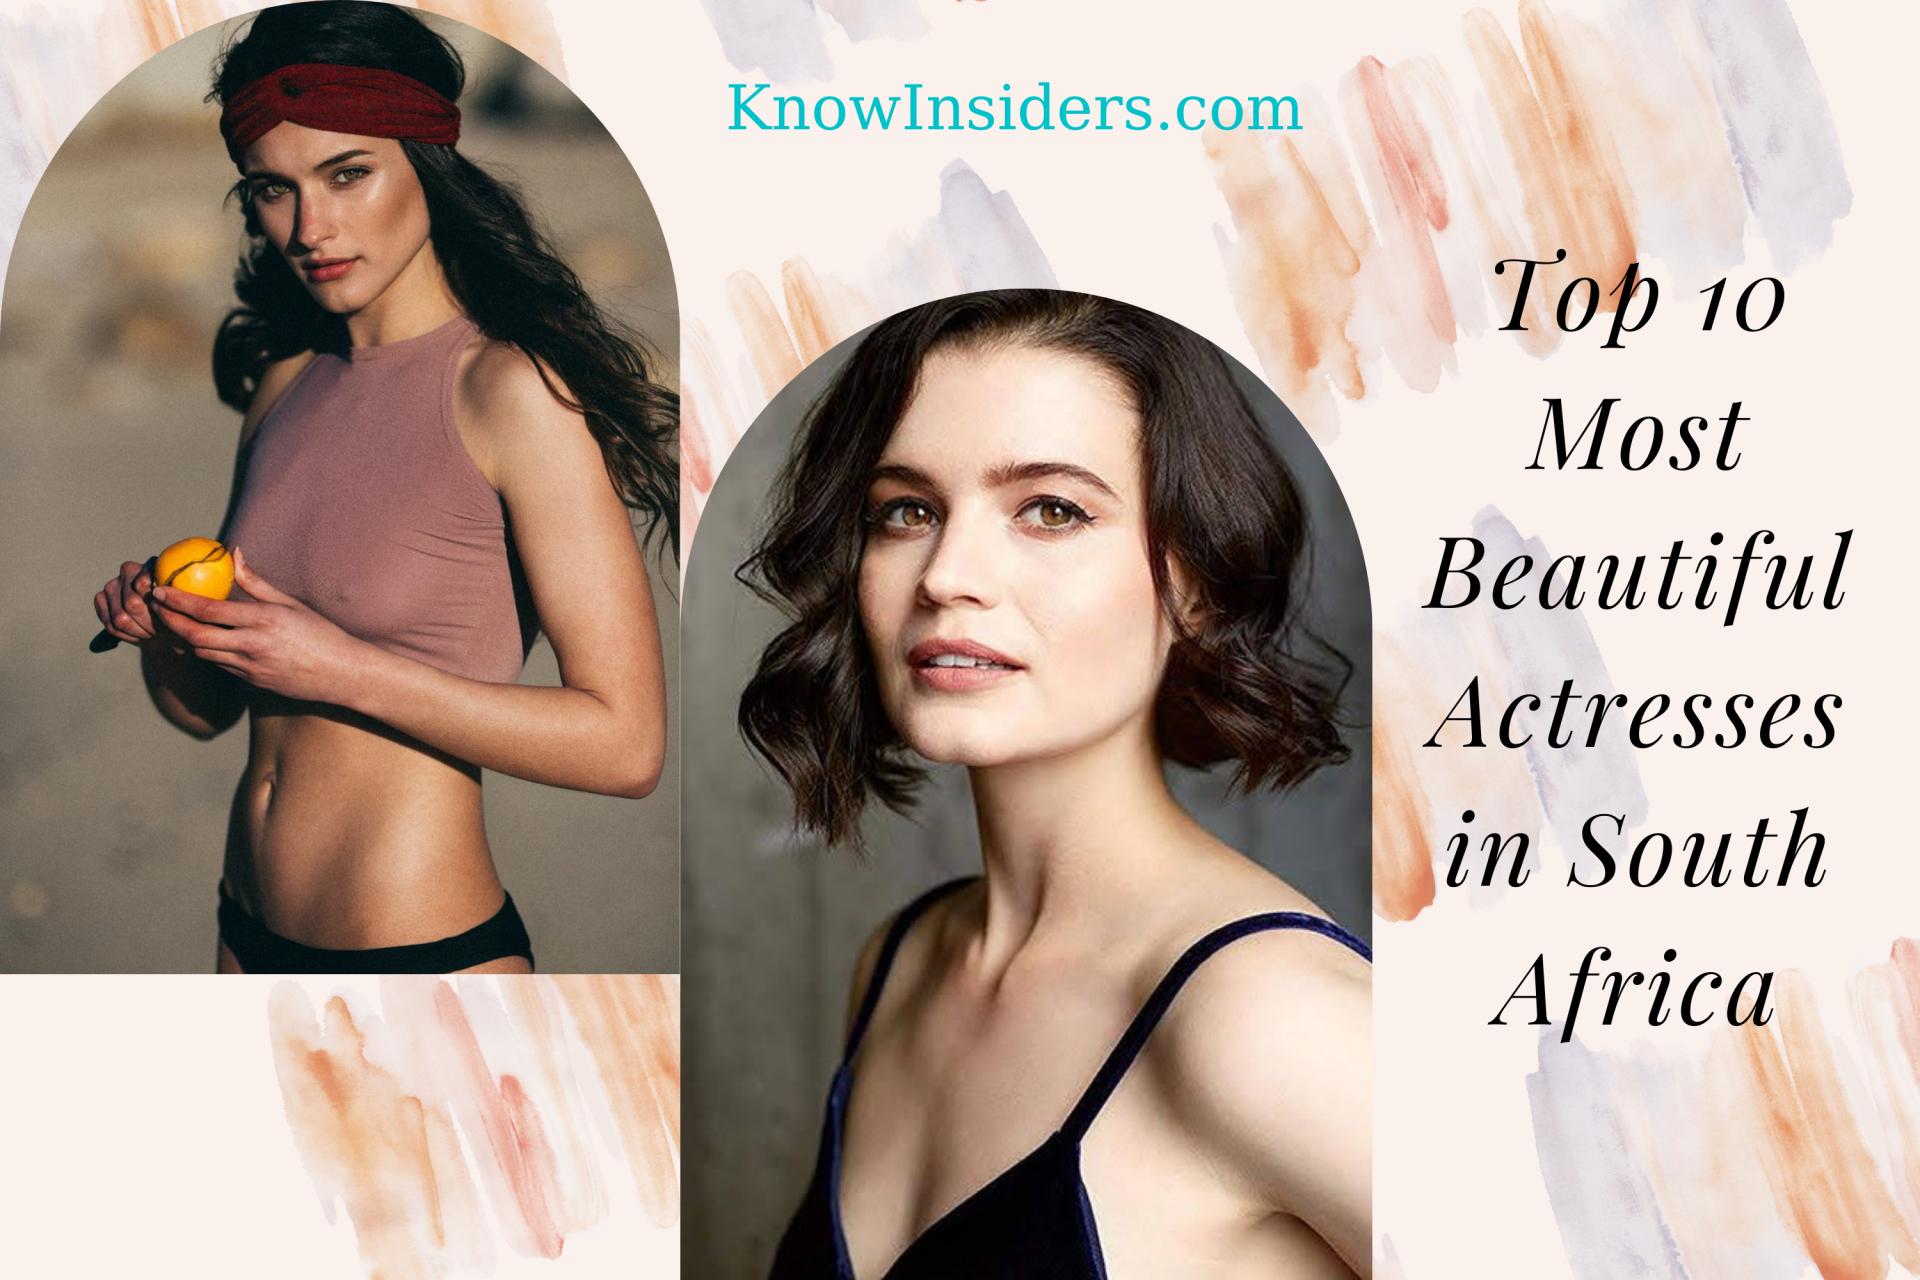 Top 10 Most Beautiful Actresses in South Africa